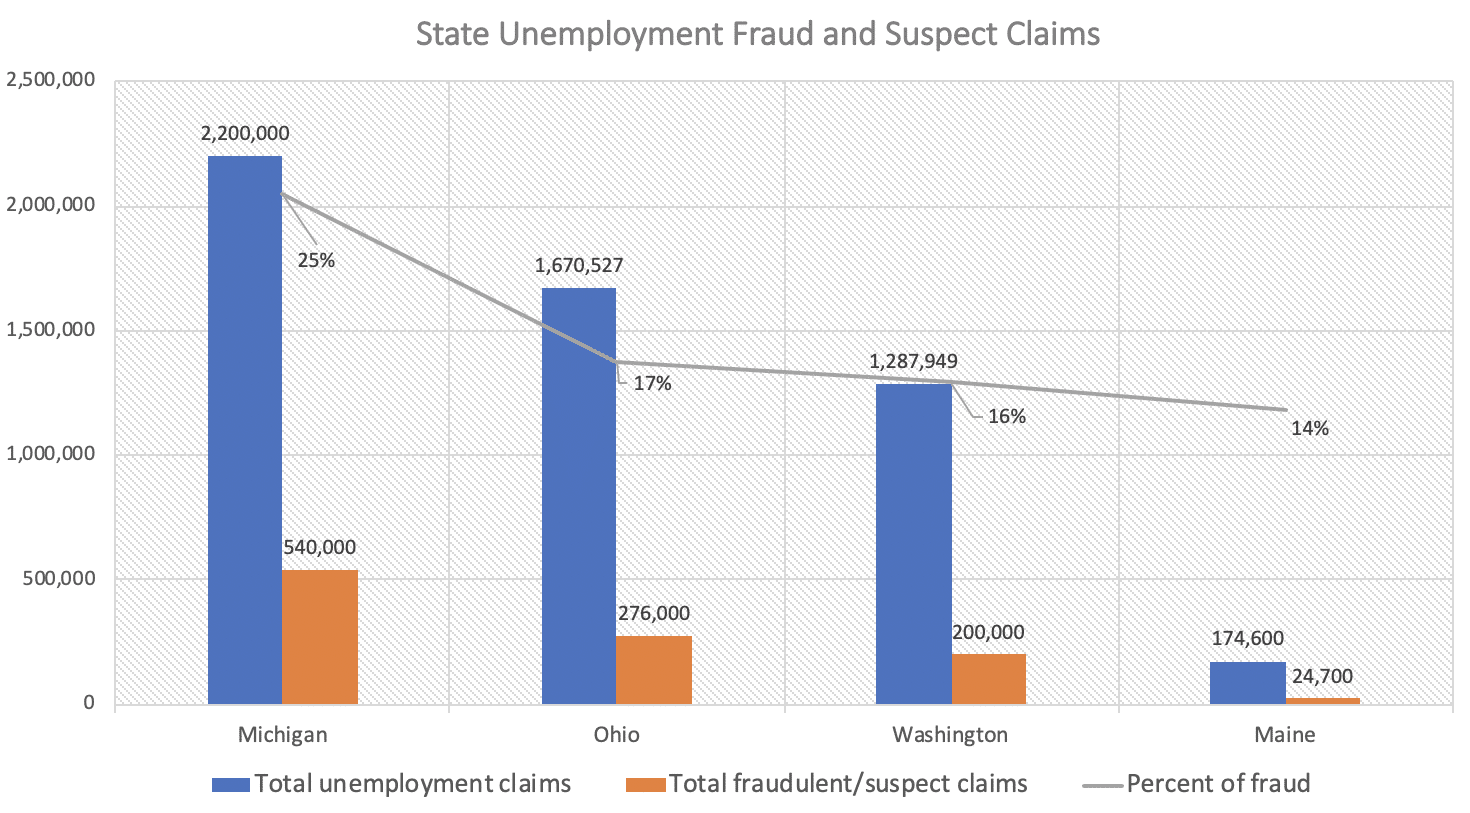 US State Unemployment Fraud and Suspect Claims